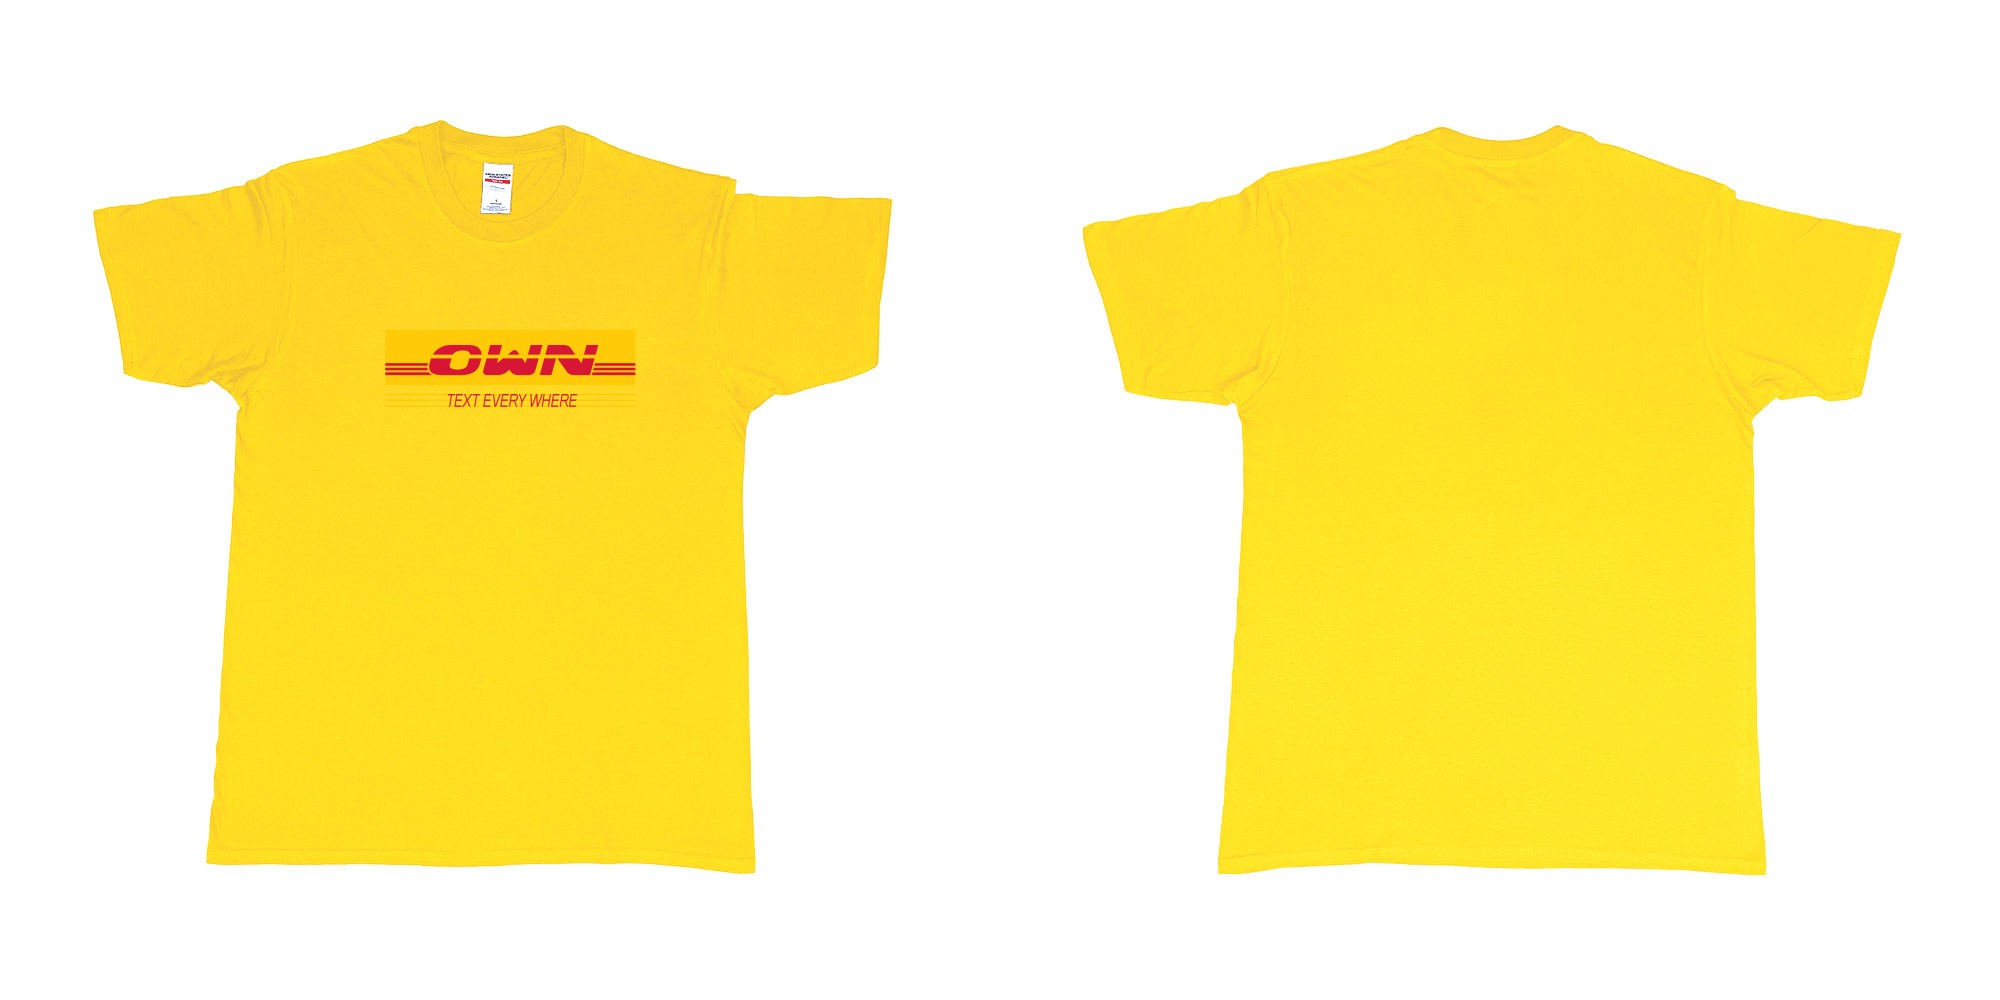 Custom tshirt design DHL in fabric color daisy choice your own text made in Bali by The Pirate Way